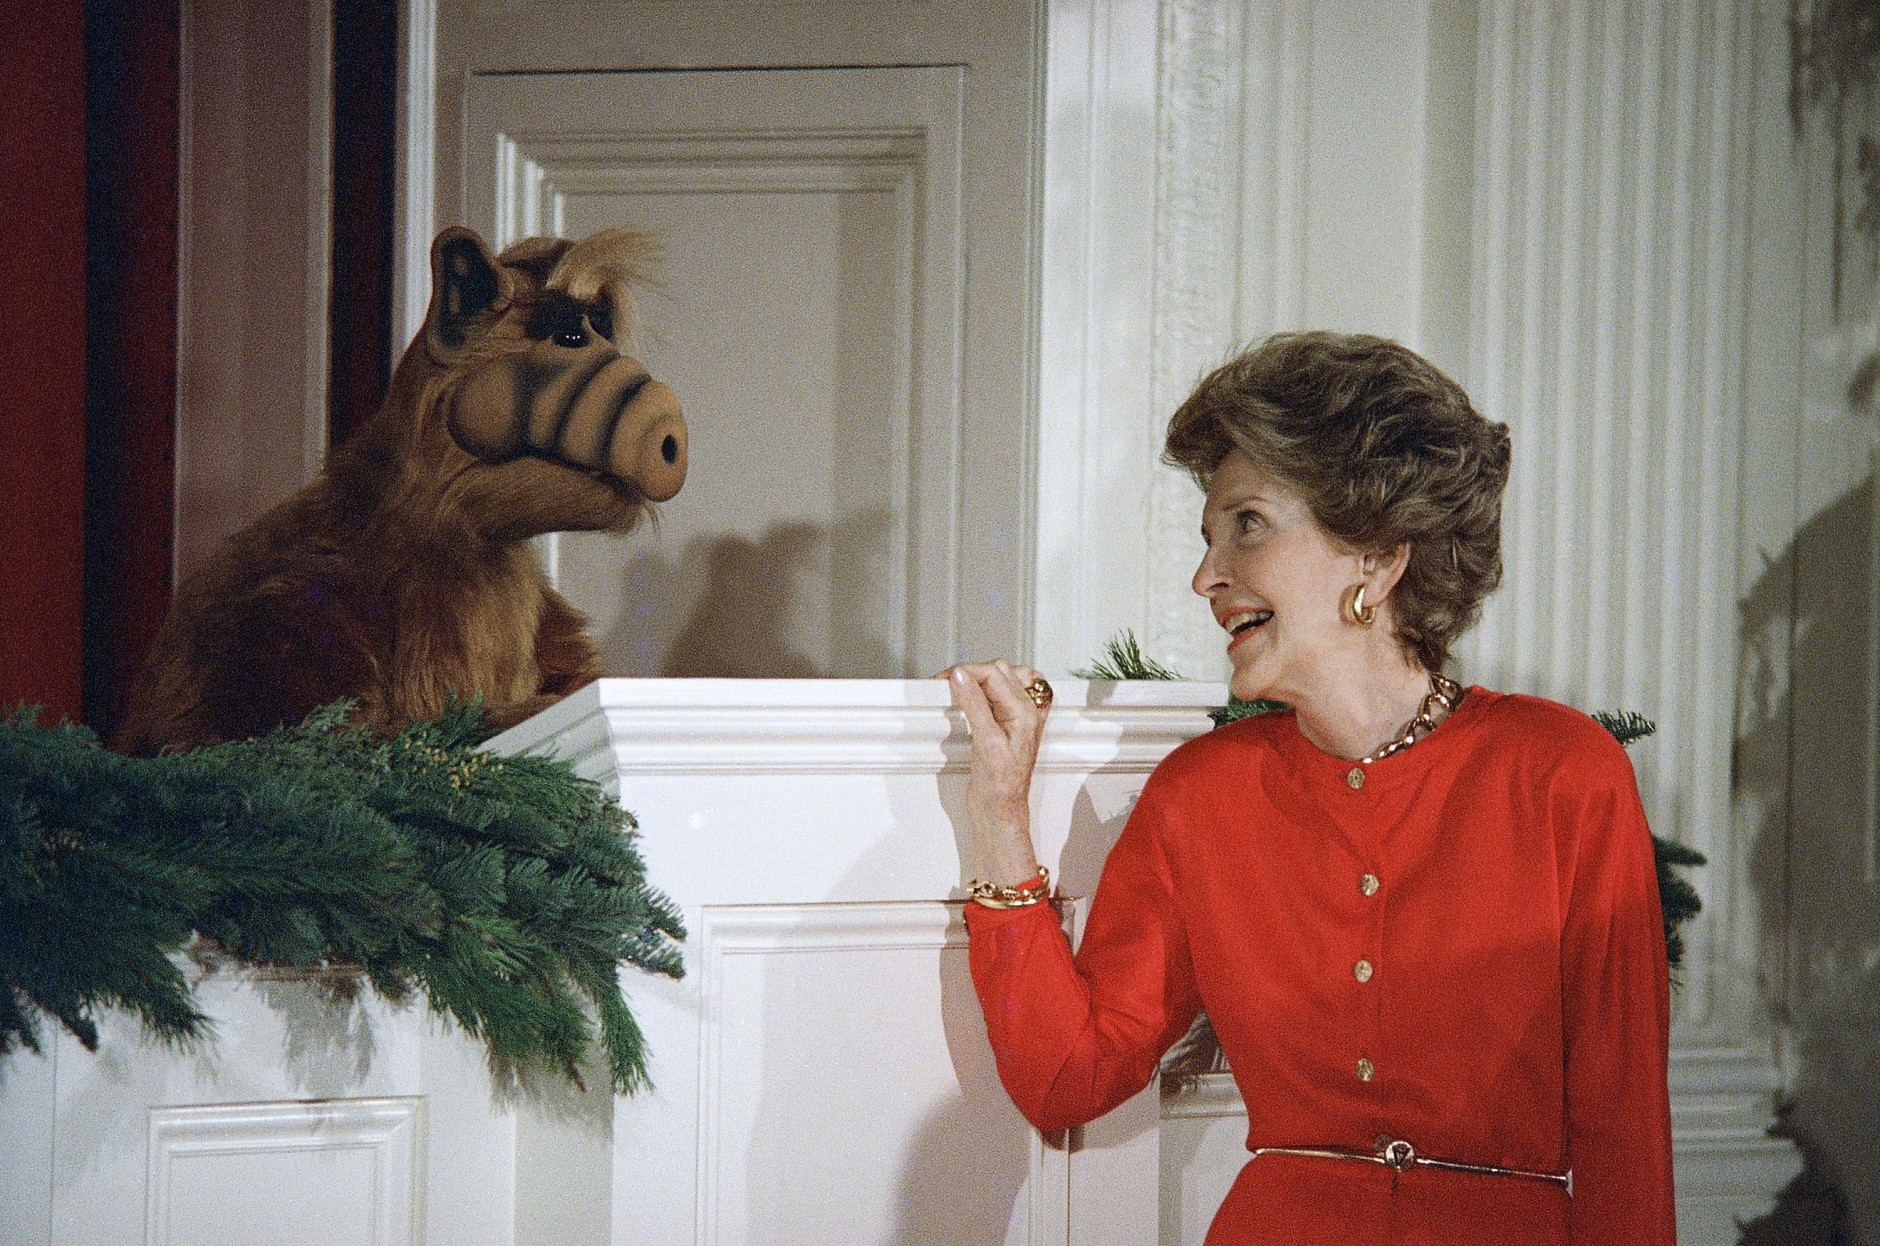 Michu Meszaros, who played the alien life form ALF on the TV show of the same name, died June 12, 2016. In a 1987 picture, first lady Nancy Reagan glances towards a puppet form of ALF during a Christmas party for Children of Washington's diplomatic corps at the White House.